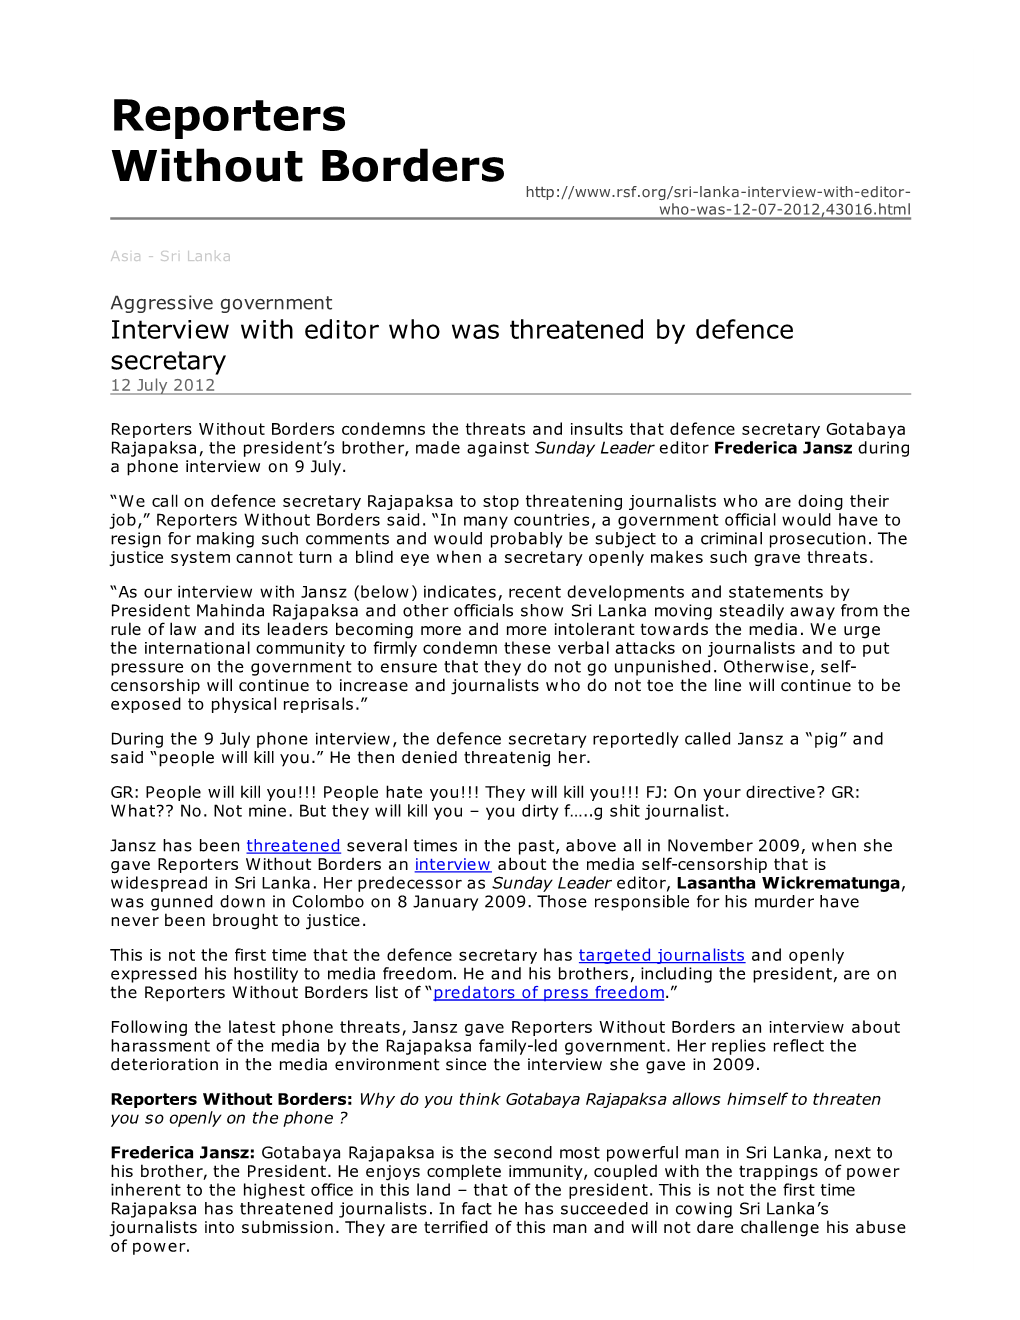 Reporters Without Borders Who-Was-12-07-2012,43016.Html